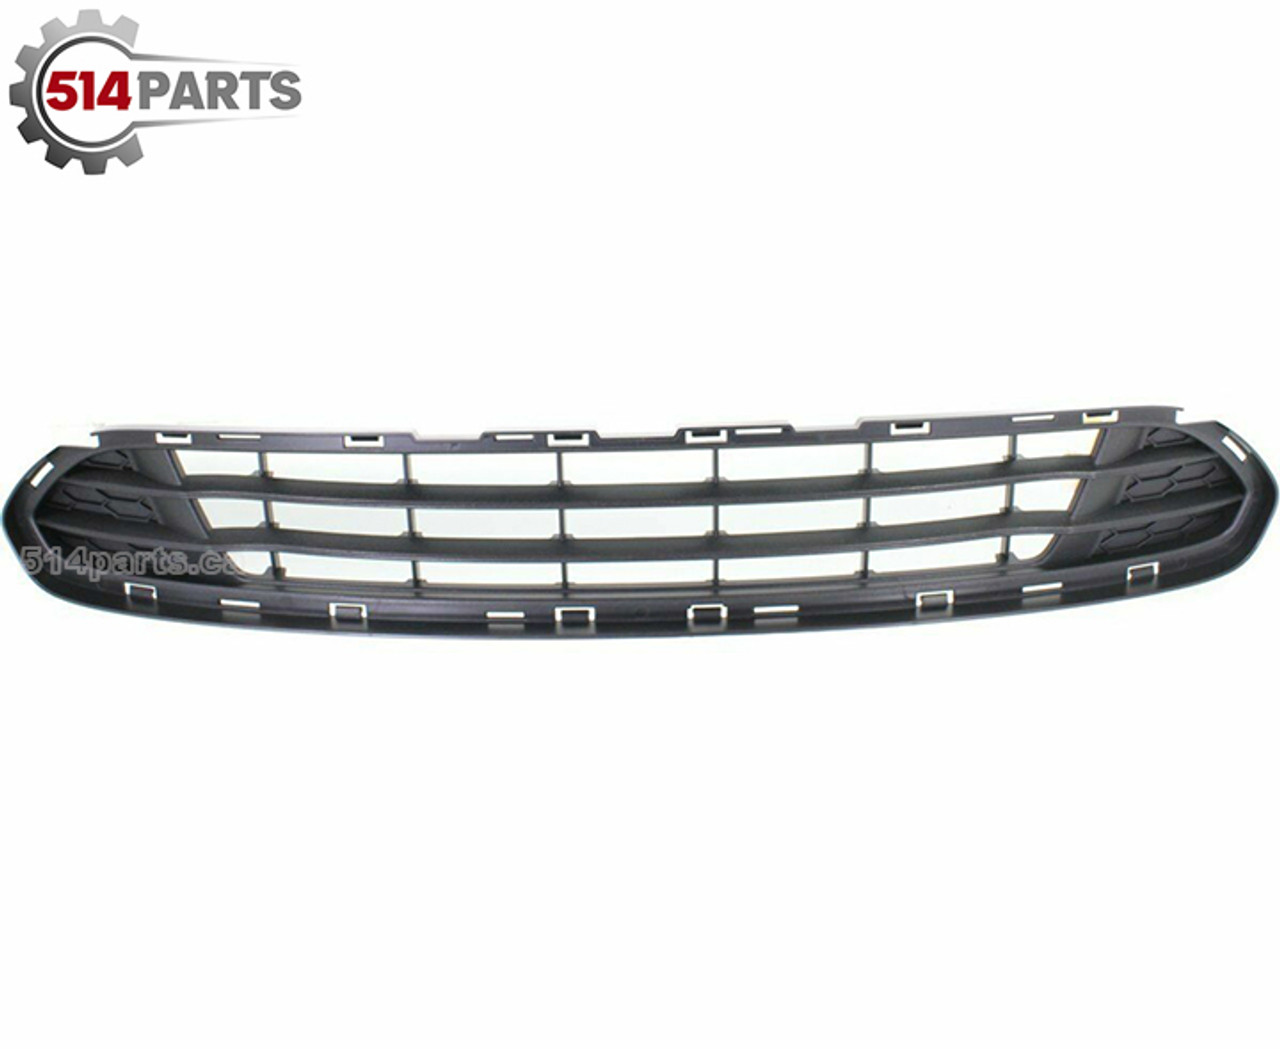 2010 - 2012 FORD FUSION and FUSION HYBRID without SPORT FRONT LOWER BUMPER COVER GRILLE DARK GRAY - CALANDRE INFERIEUR pour PARE-CHOC AVANT GRIS FONCE